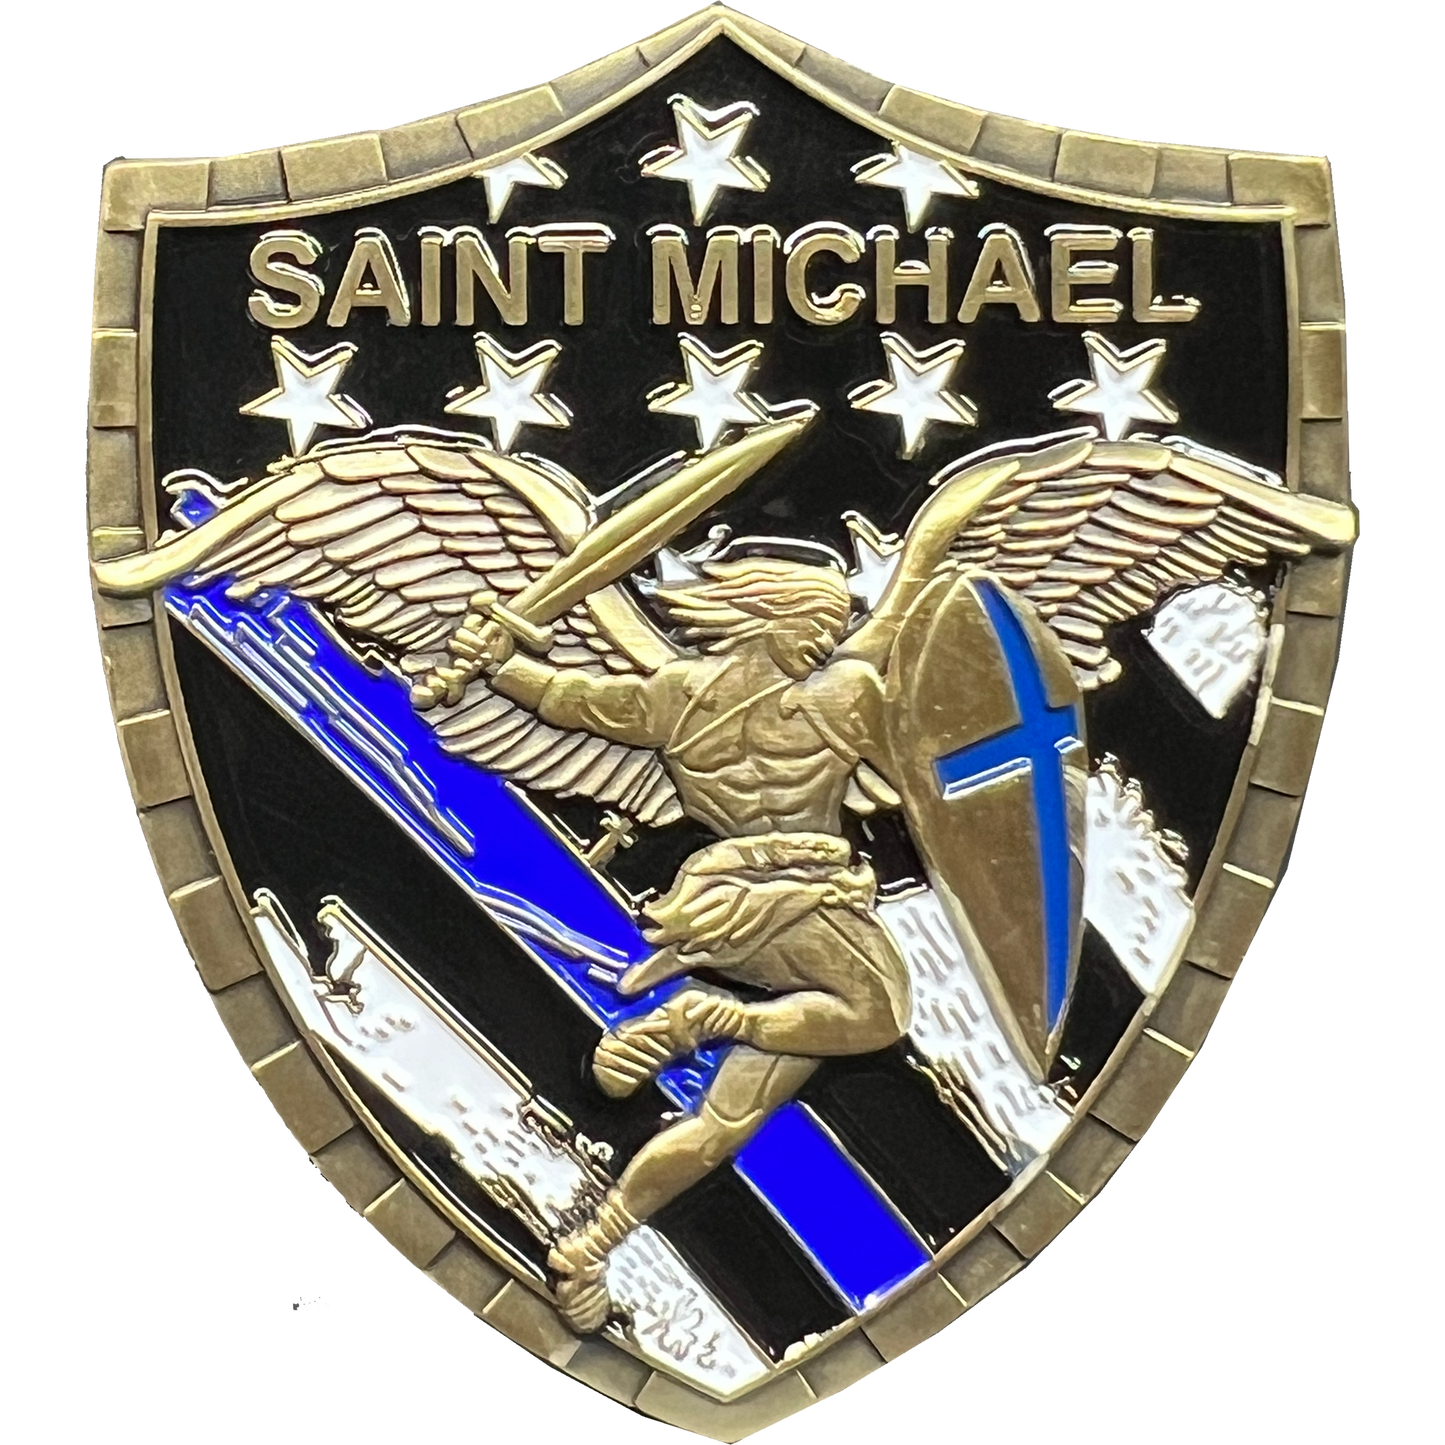 GL5-004 Police Saint Michael Gladiator Shield Thin Blue Line Flag Challenge Coin LAPD NYPD CPD CBP BI ATF